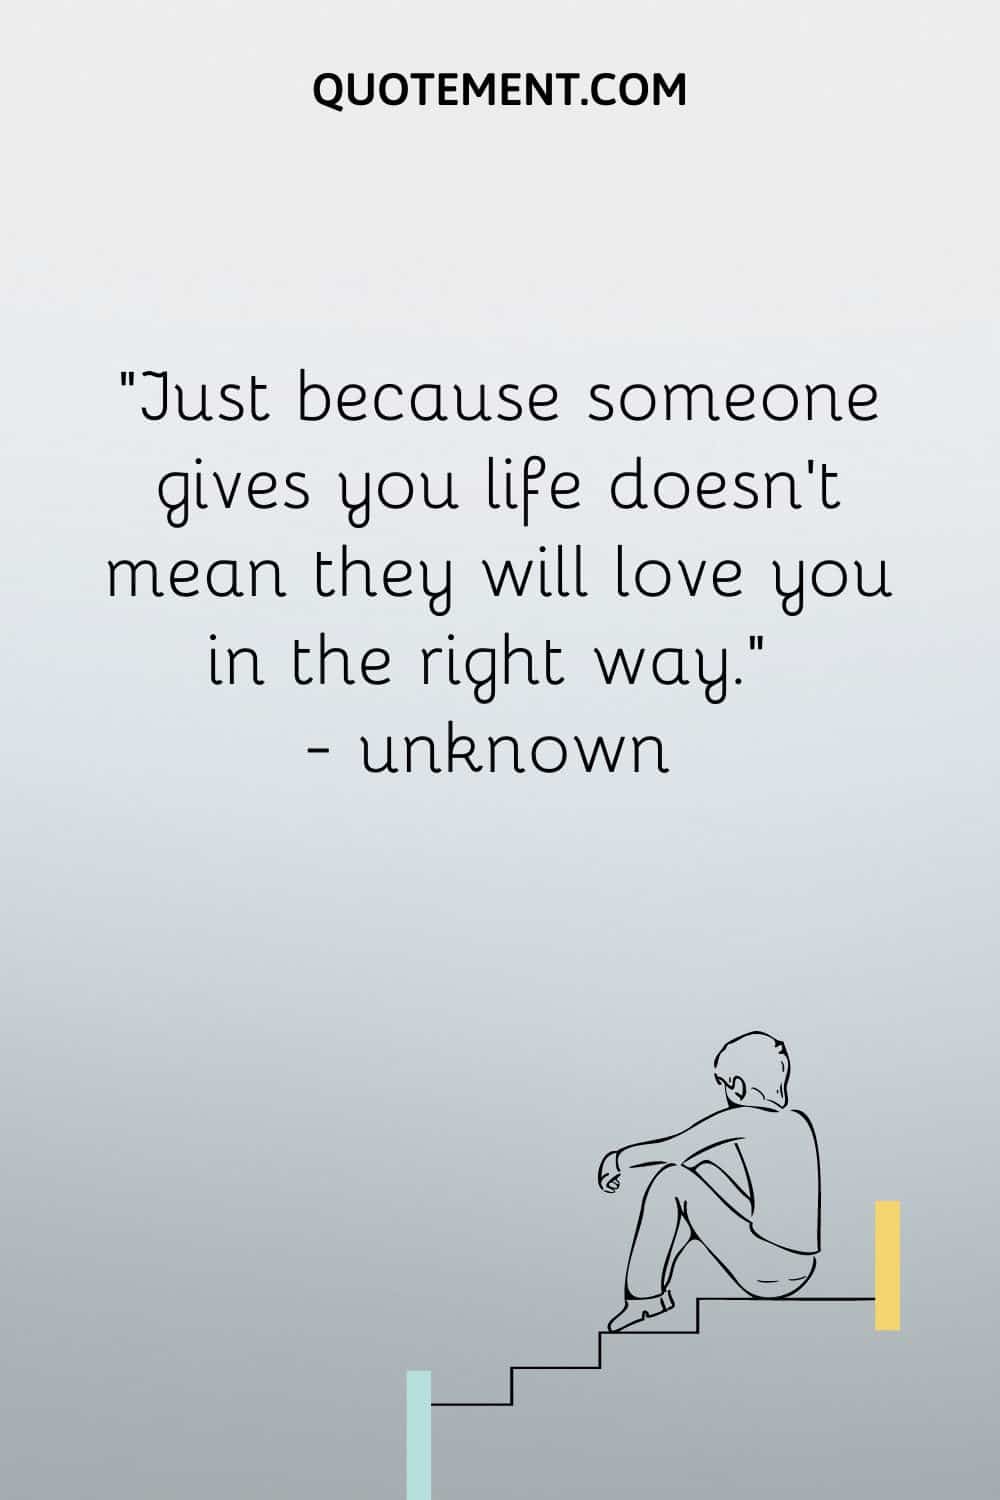 Just because someone gives you life doesn’t mean they will love you in the right way